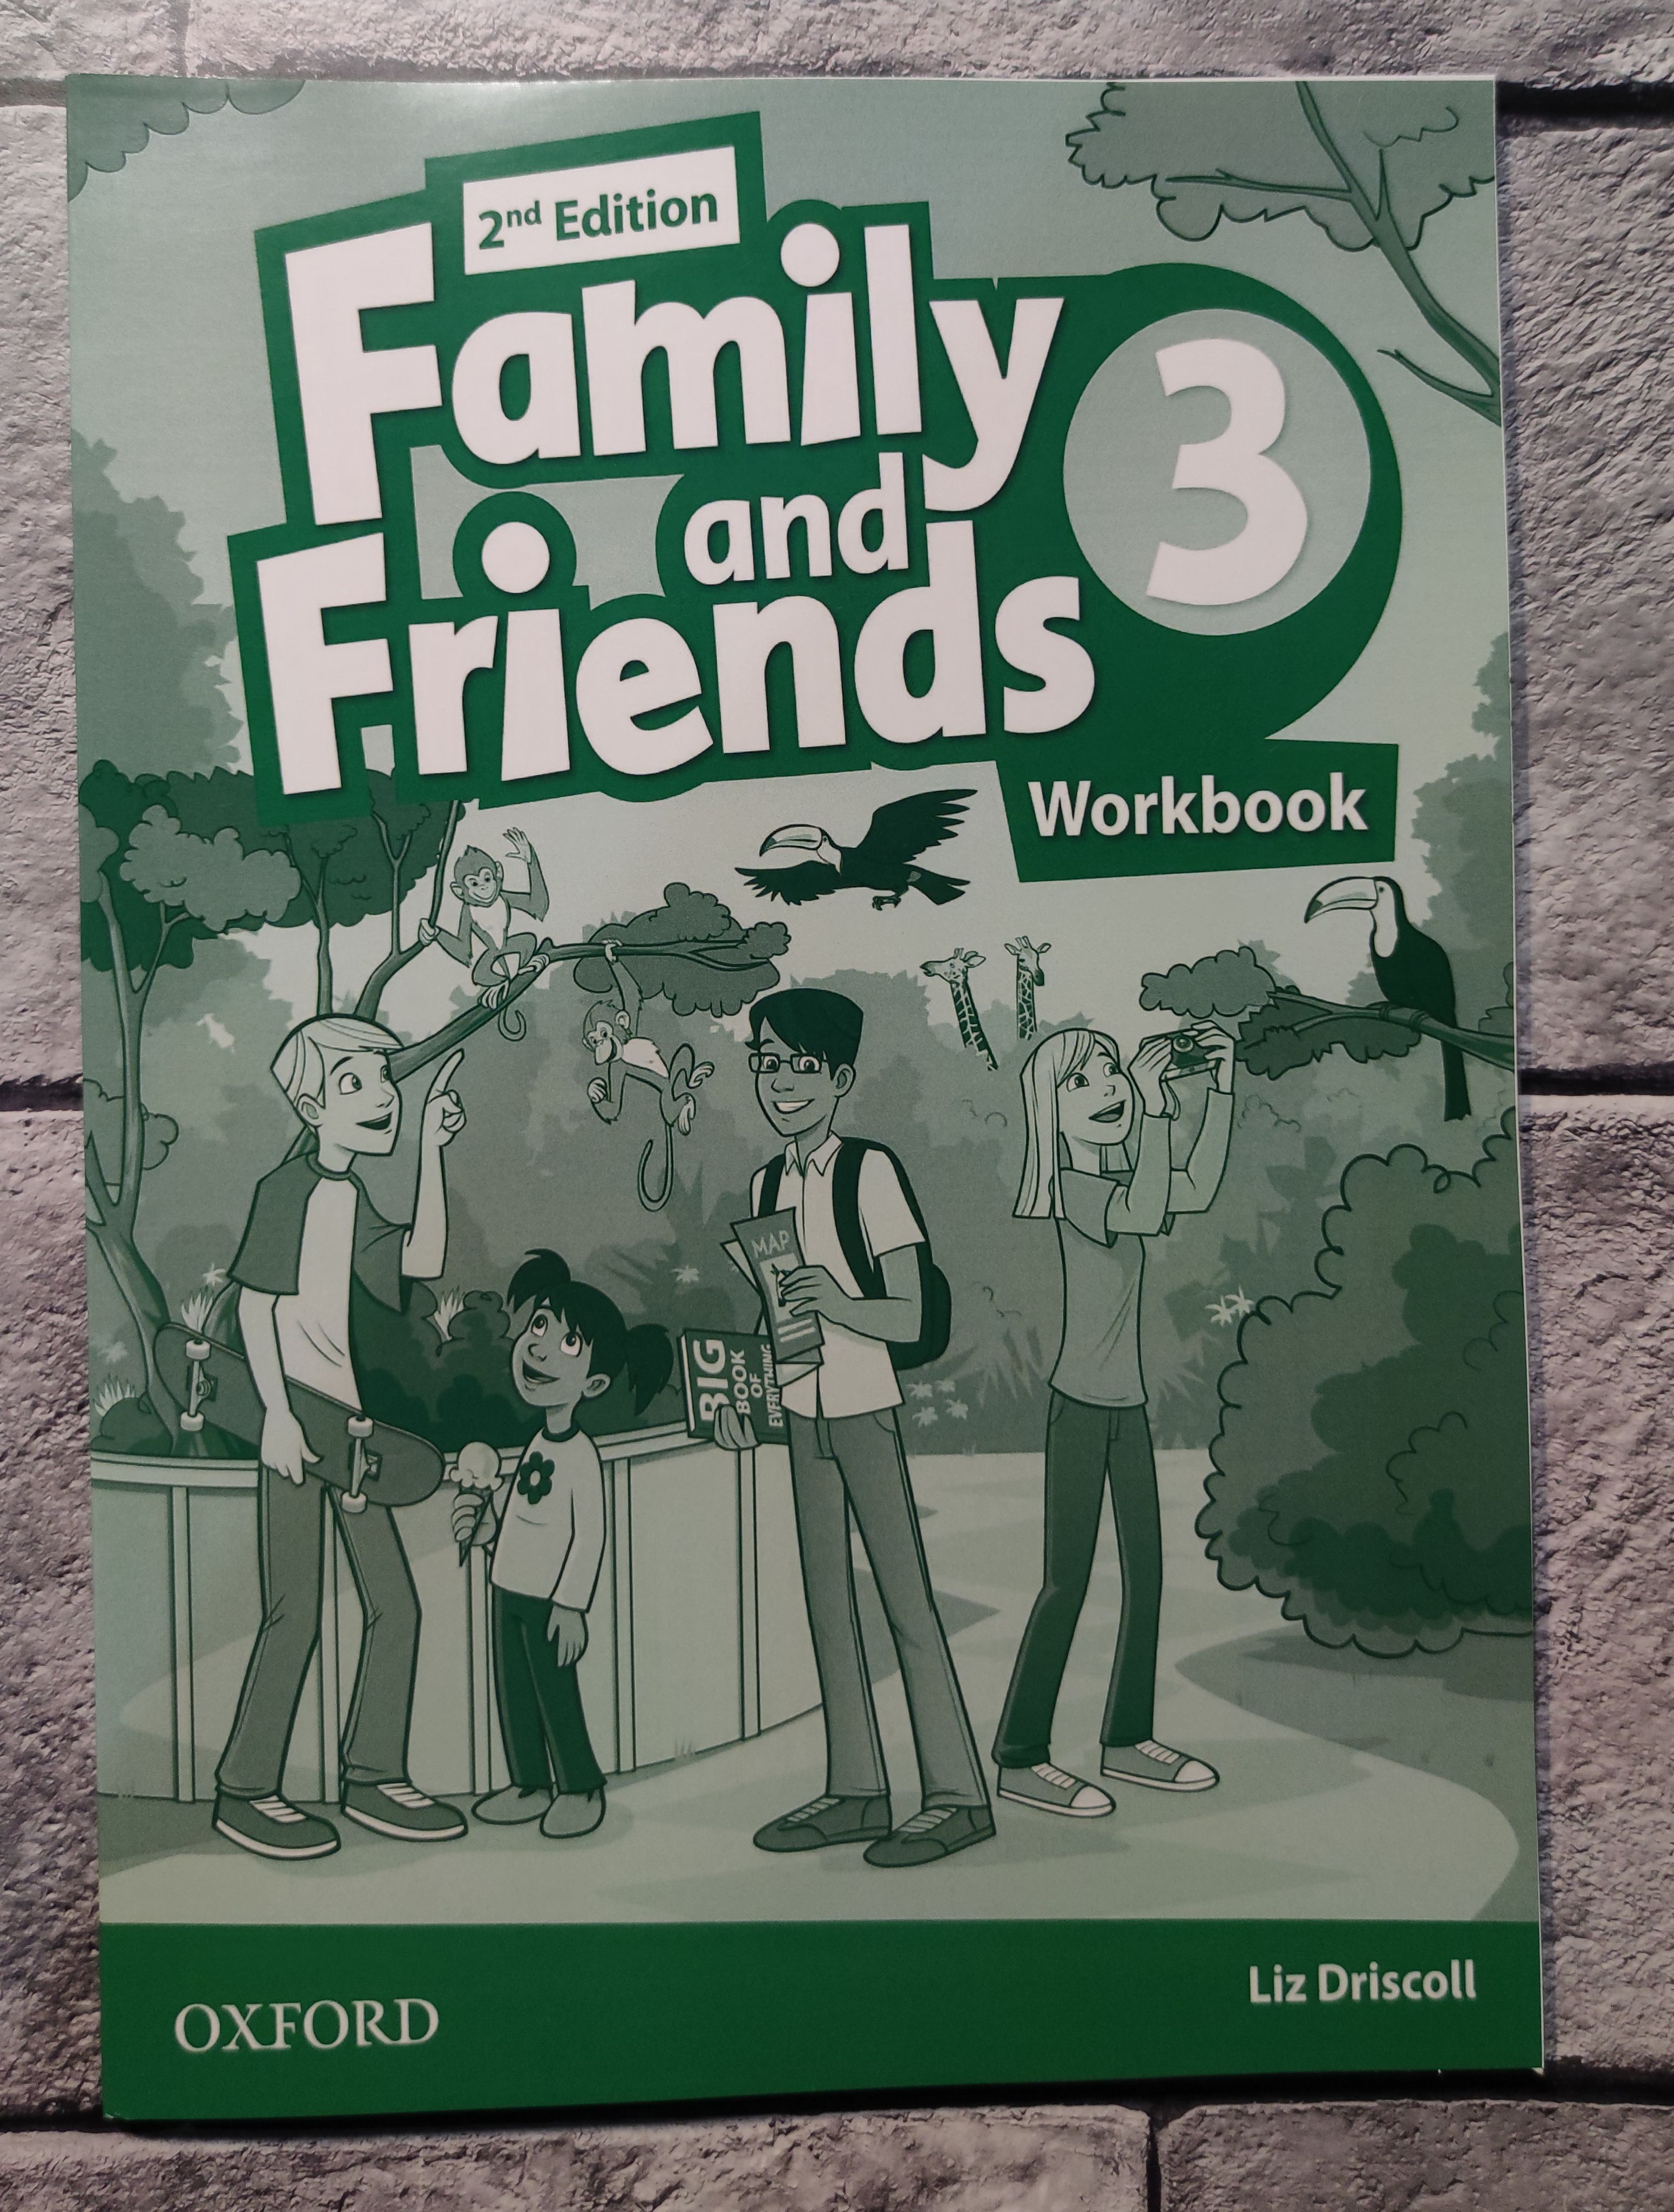 Family and friends 4 2nd edition workbook. Famly ang friends 4 Workbook.